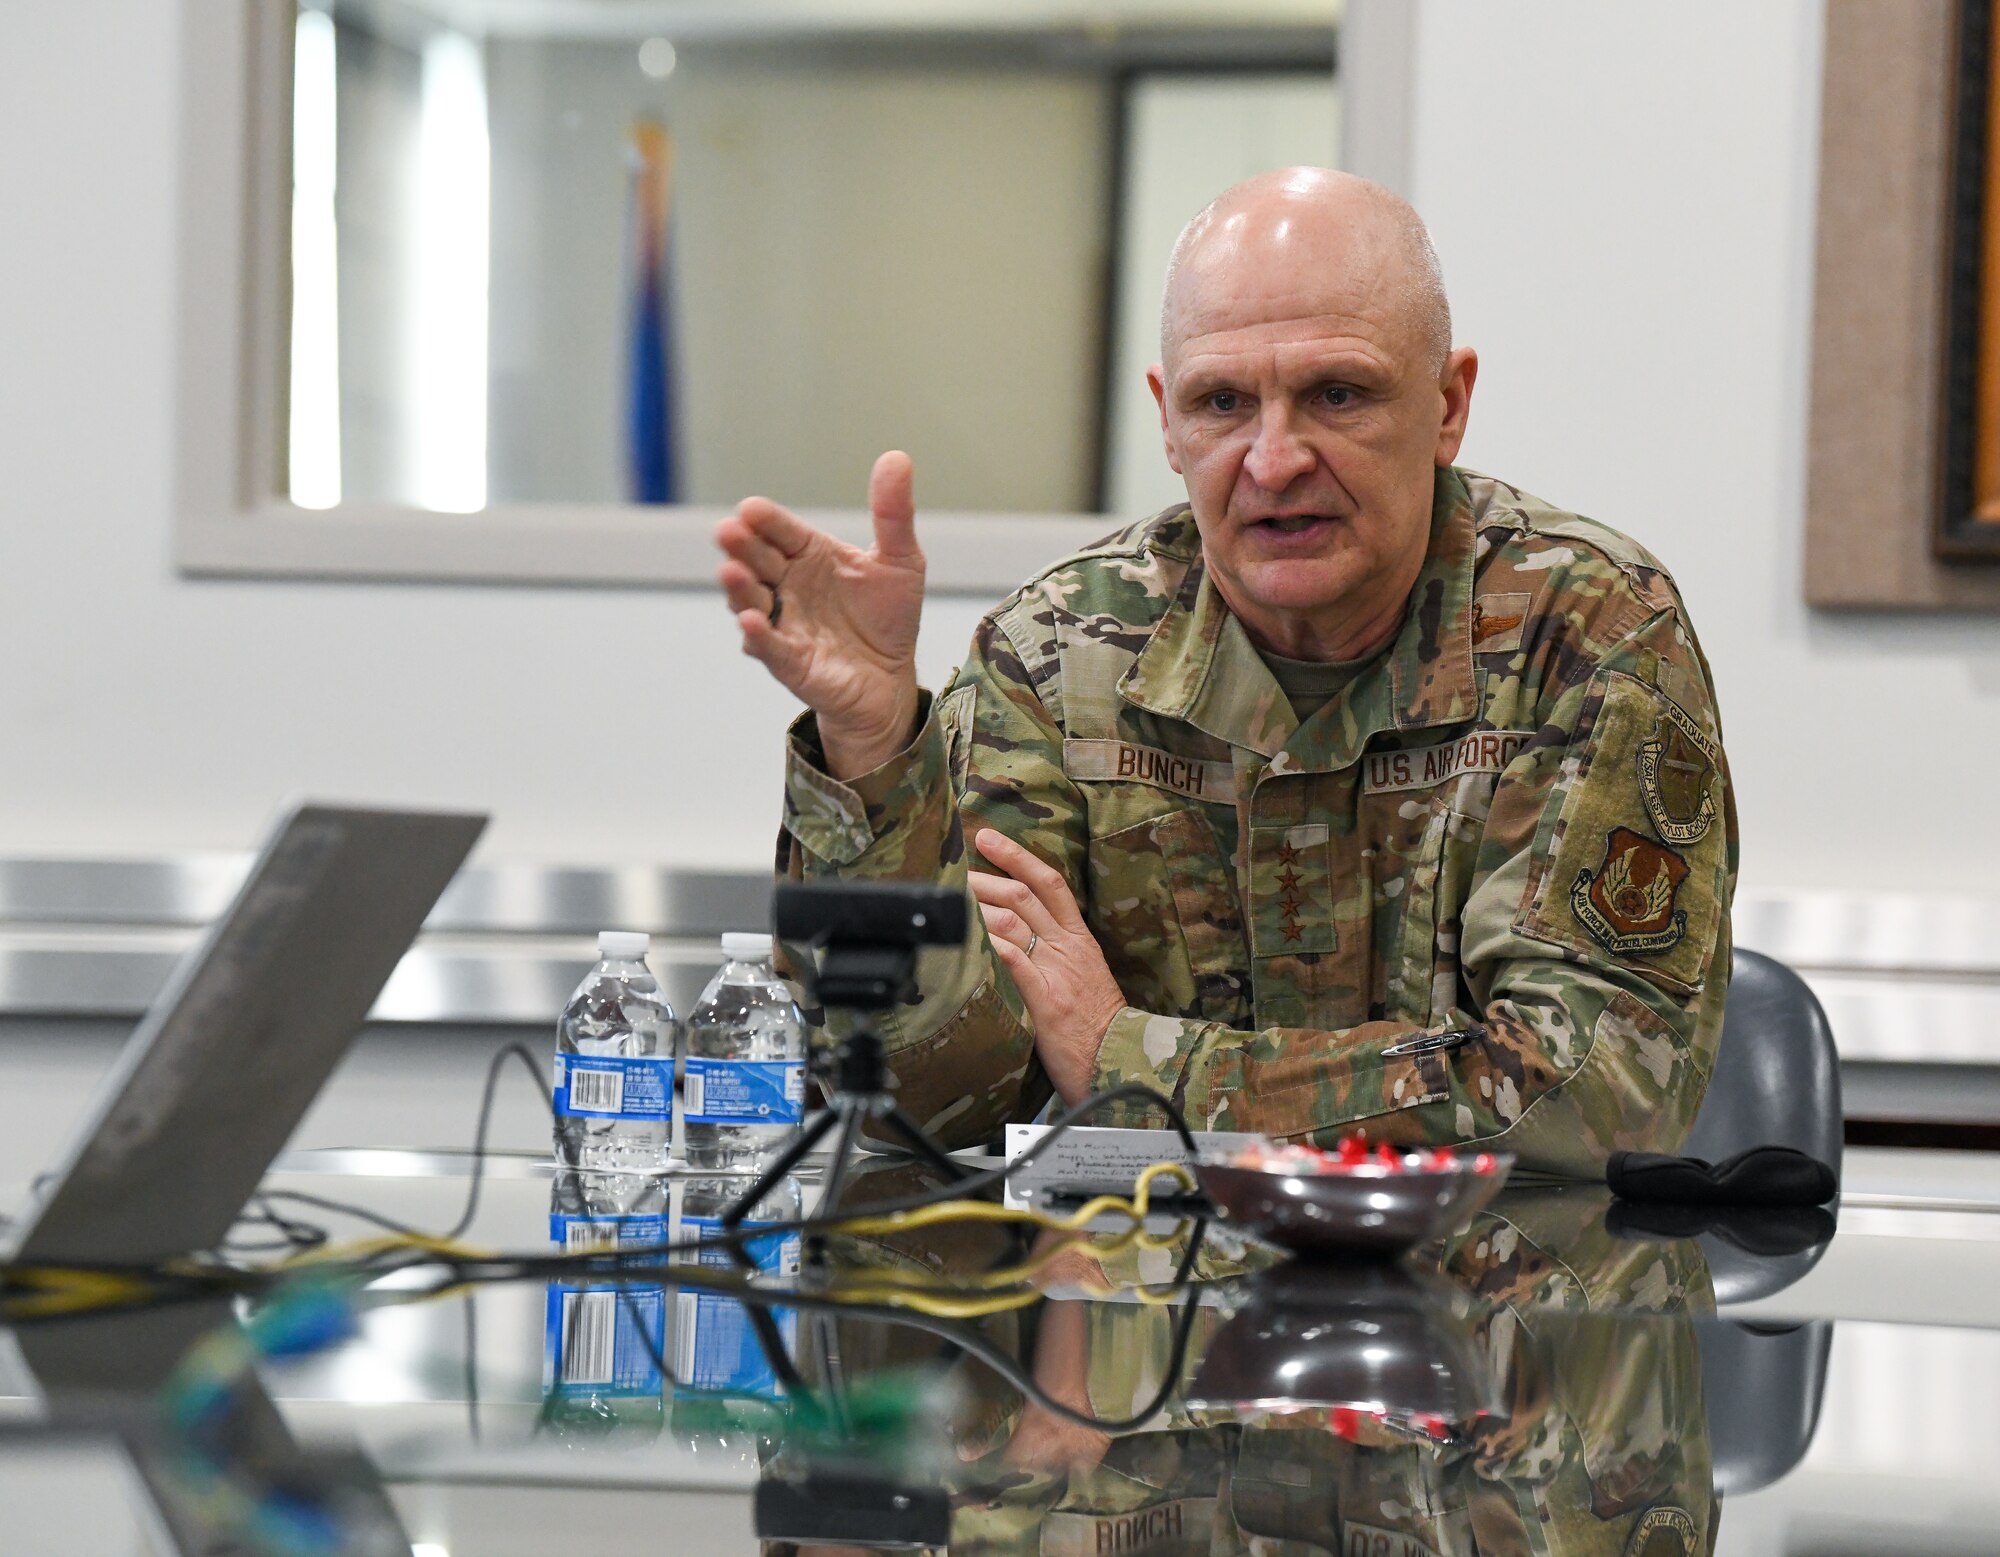 Gen. Arnold W. Bunch Jr., commander, Air Force Materiel Command, addresses members of the Arnold Engineering Development Complex (AEDC) workforce during a virtual town hall while visiting Arnold Air Force Base, Tenn., headquarters of AEDC, Jan. 27, 2022. (U.S. Air Force photo by Jill Pickett)